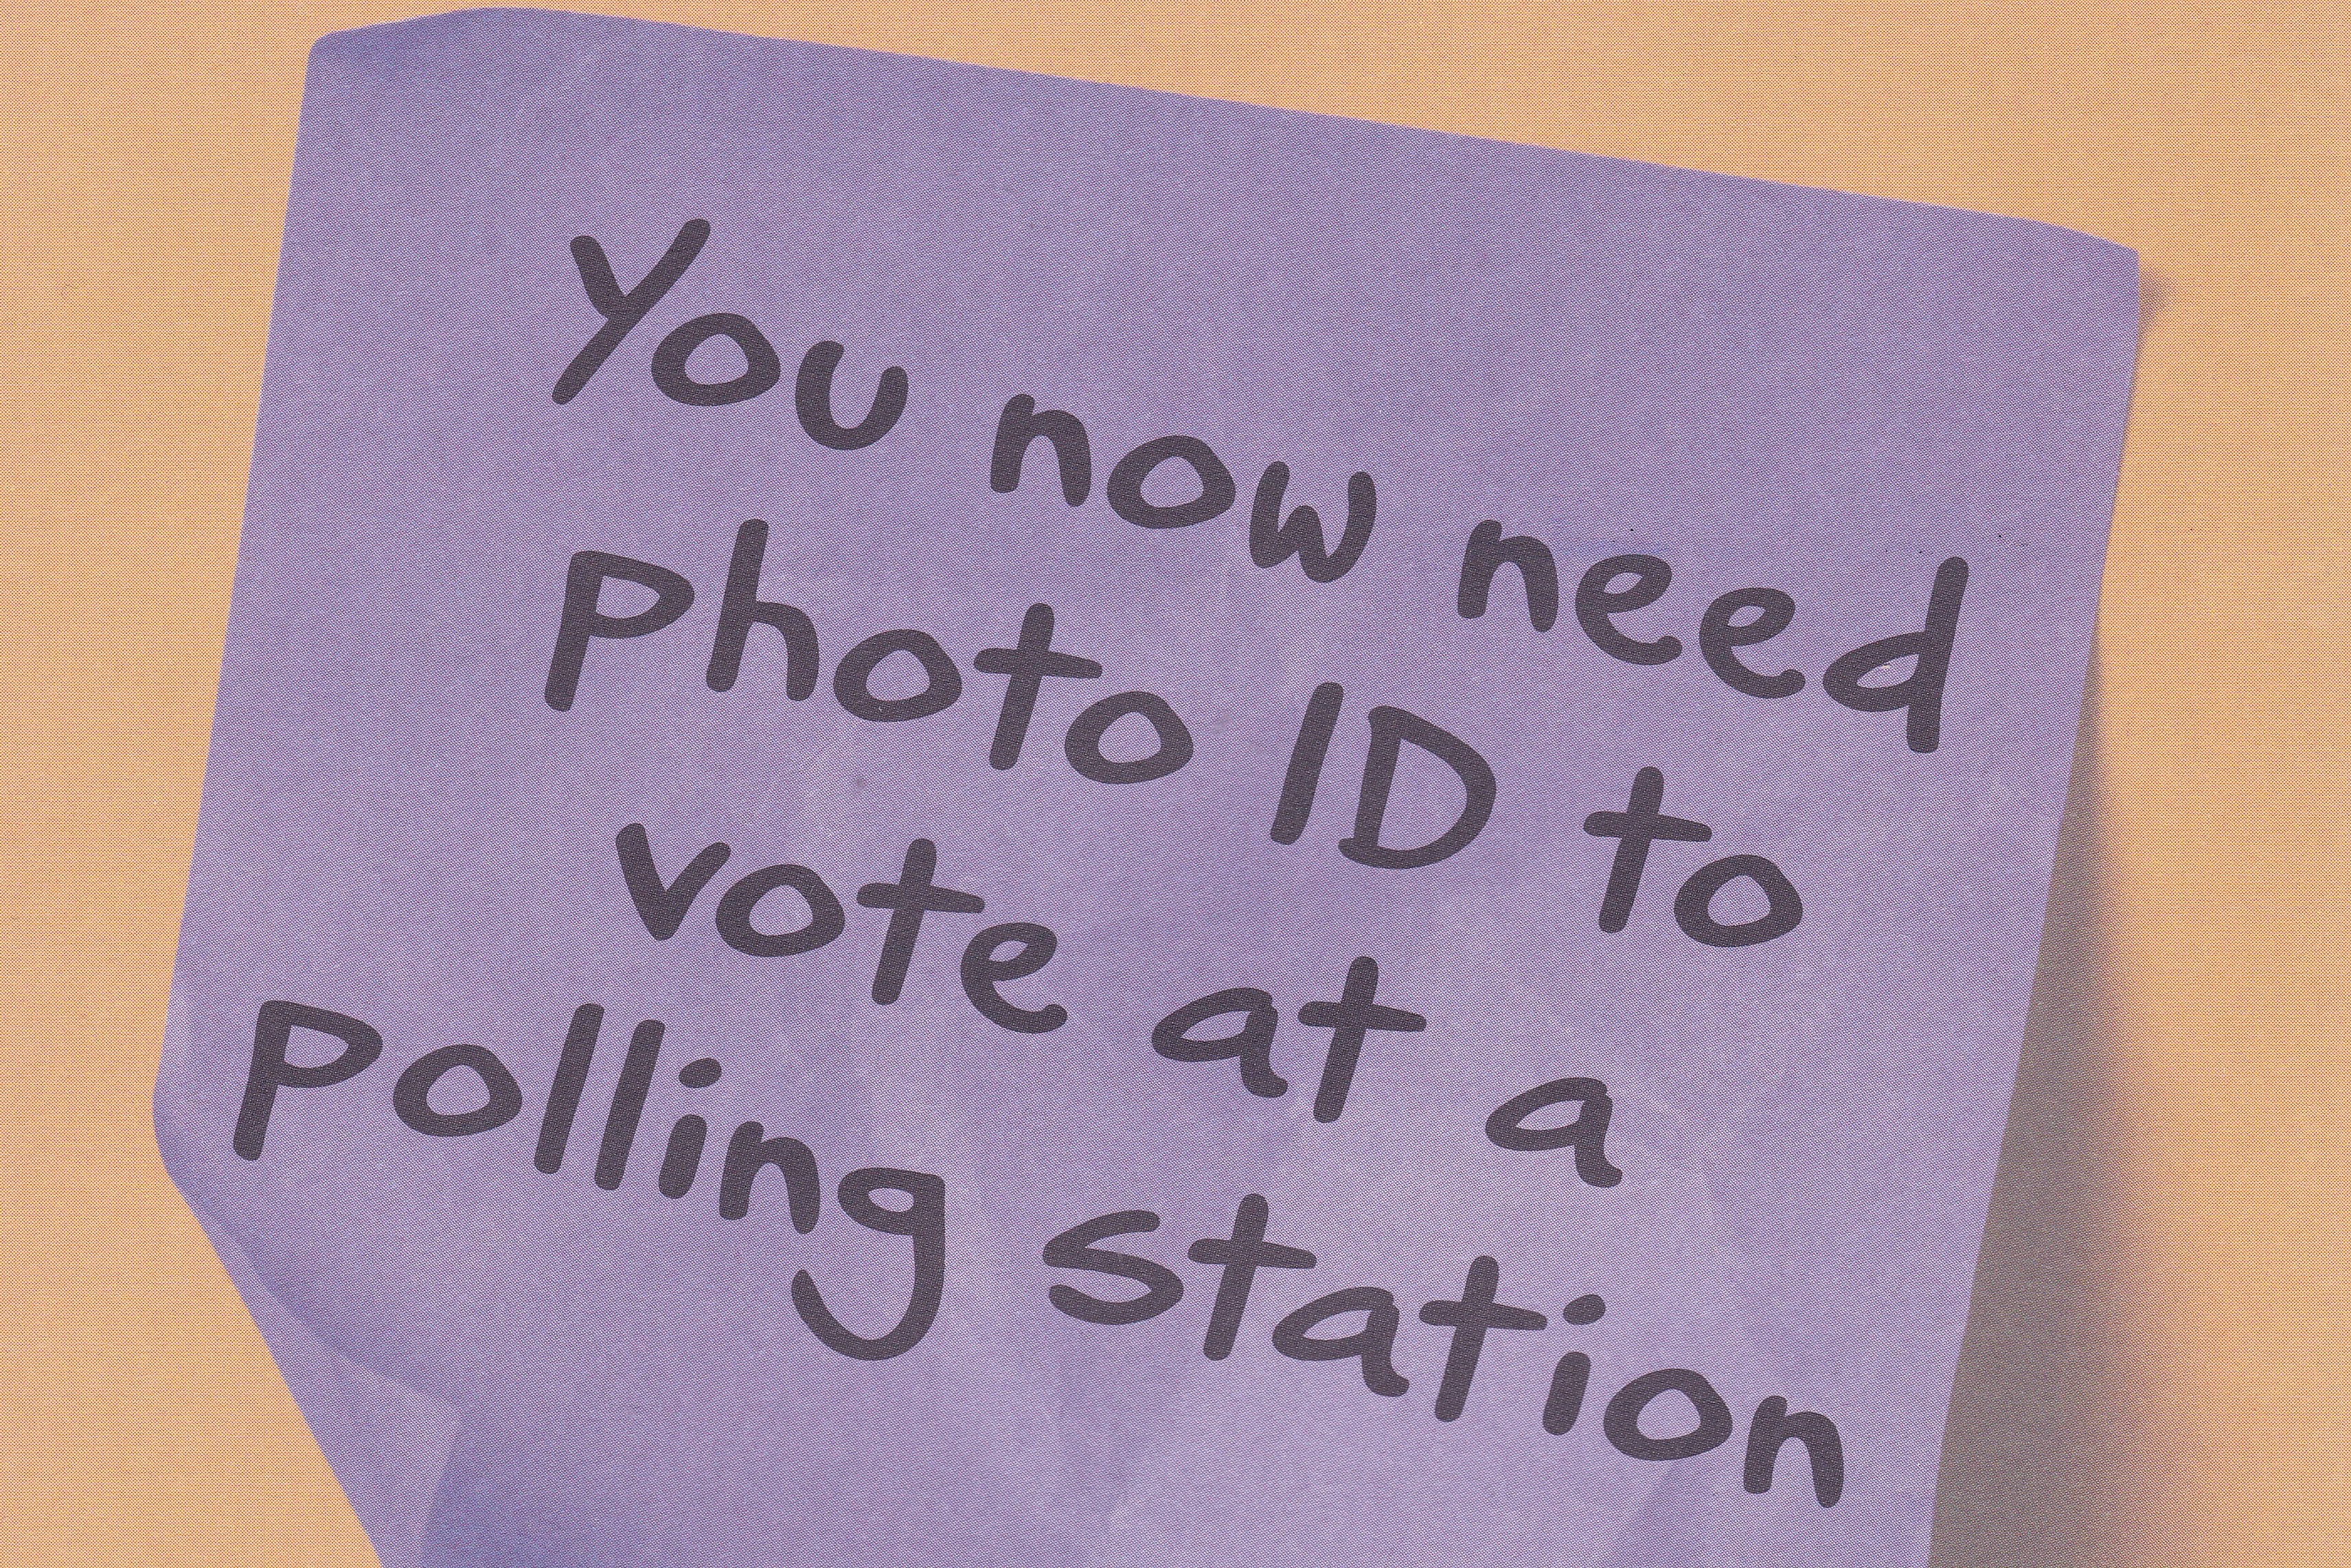 Voter IDs needed in May 2023